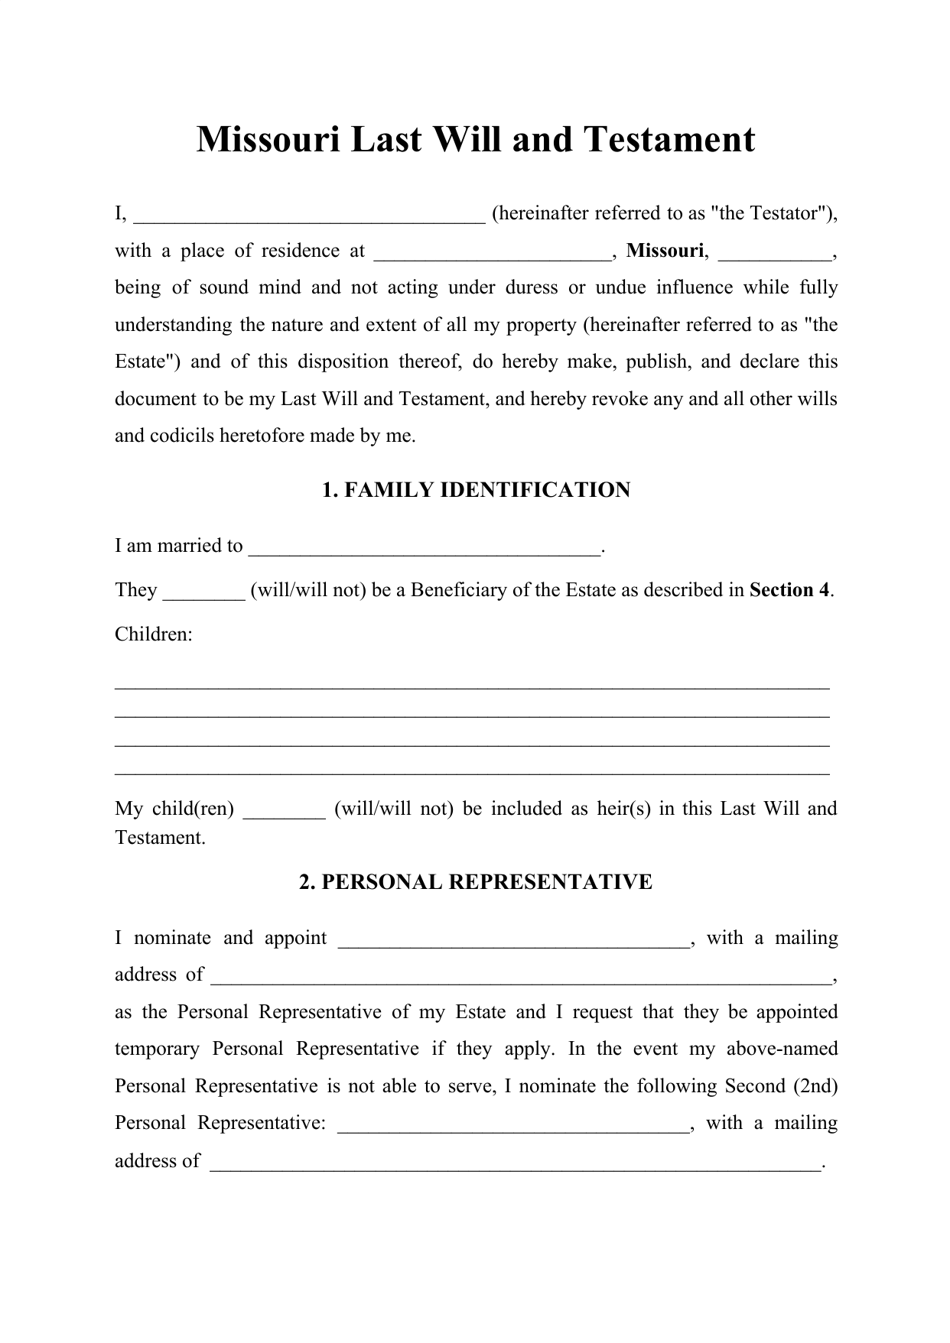 Last Will and Testament Template for Missouri